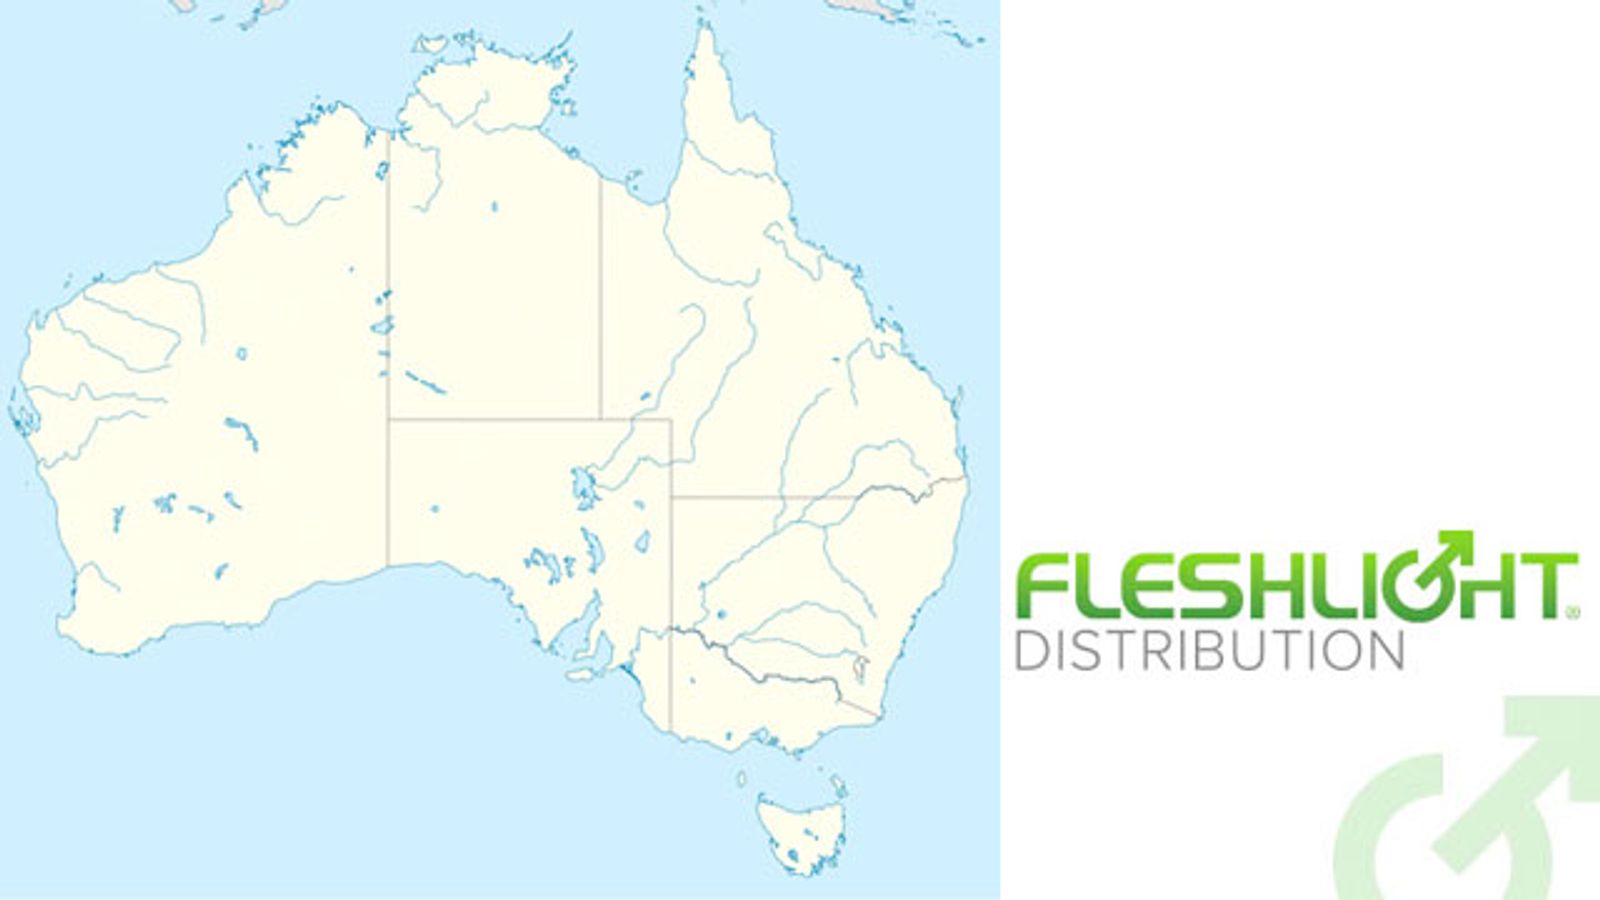 Interactive Life Forms Adds Distribution Facility in Australia